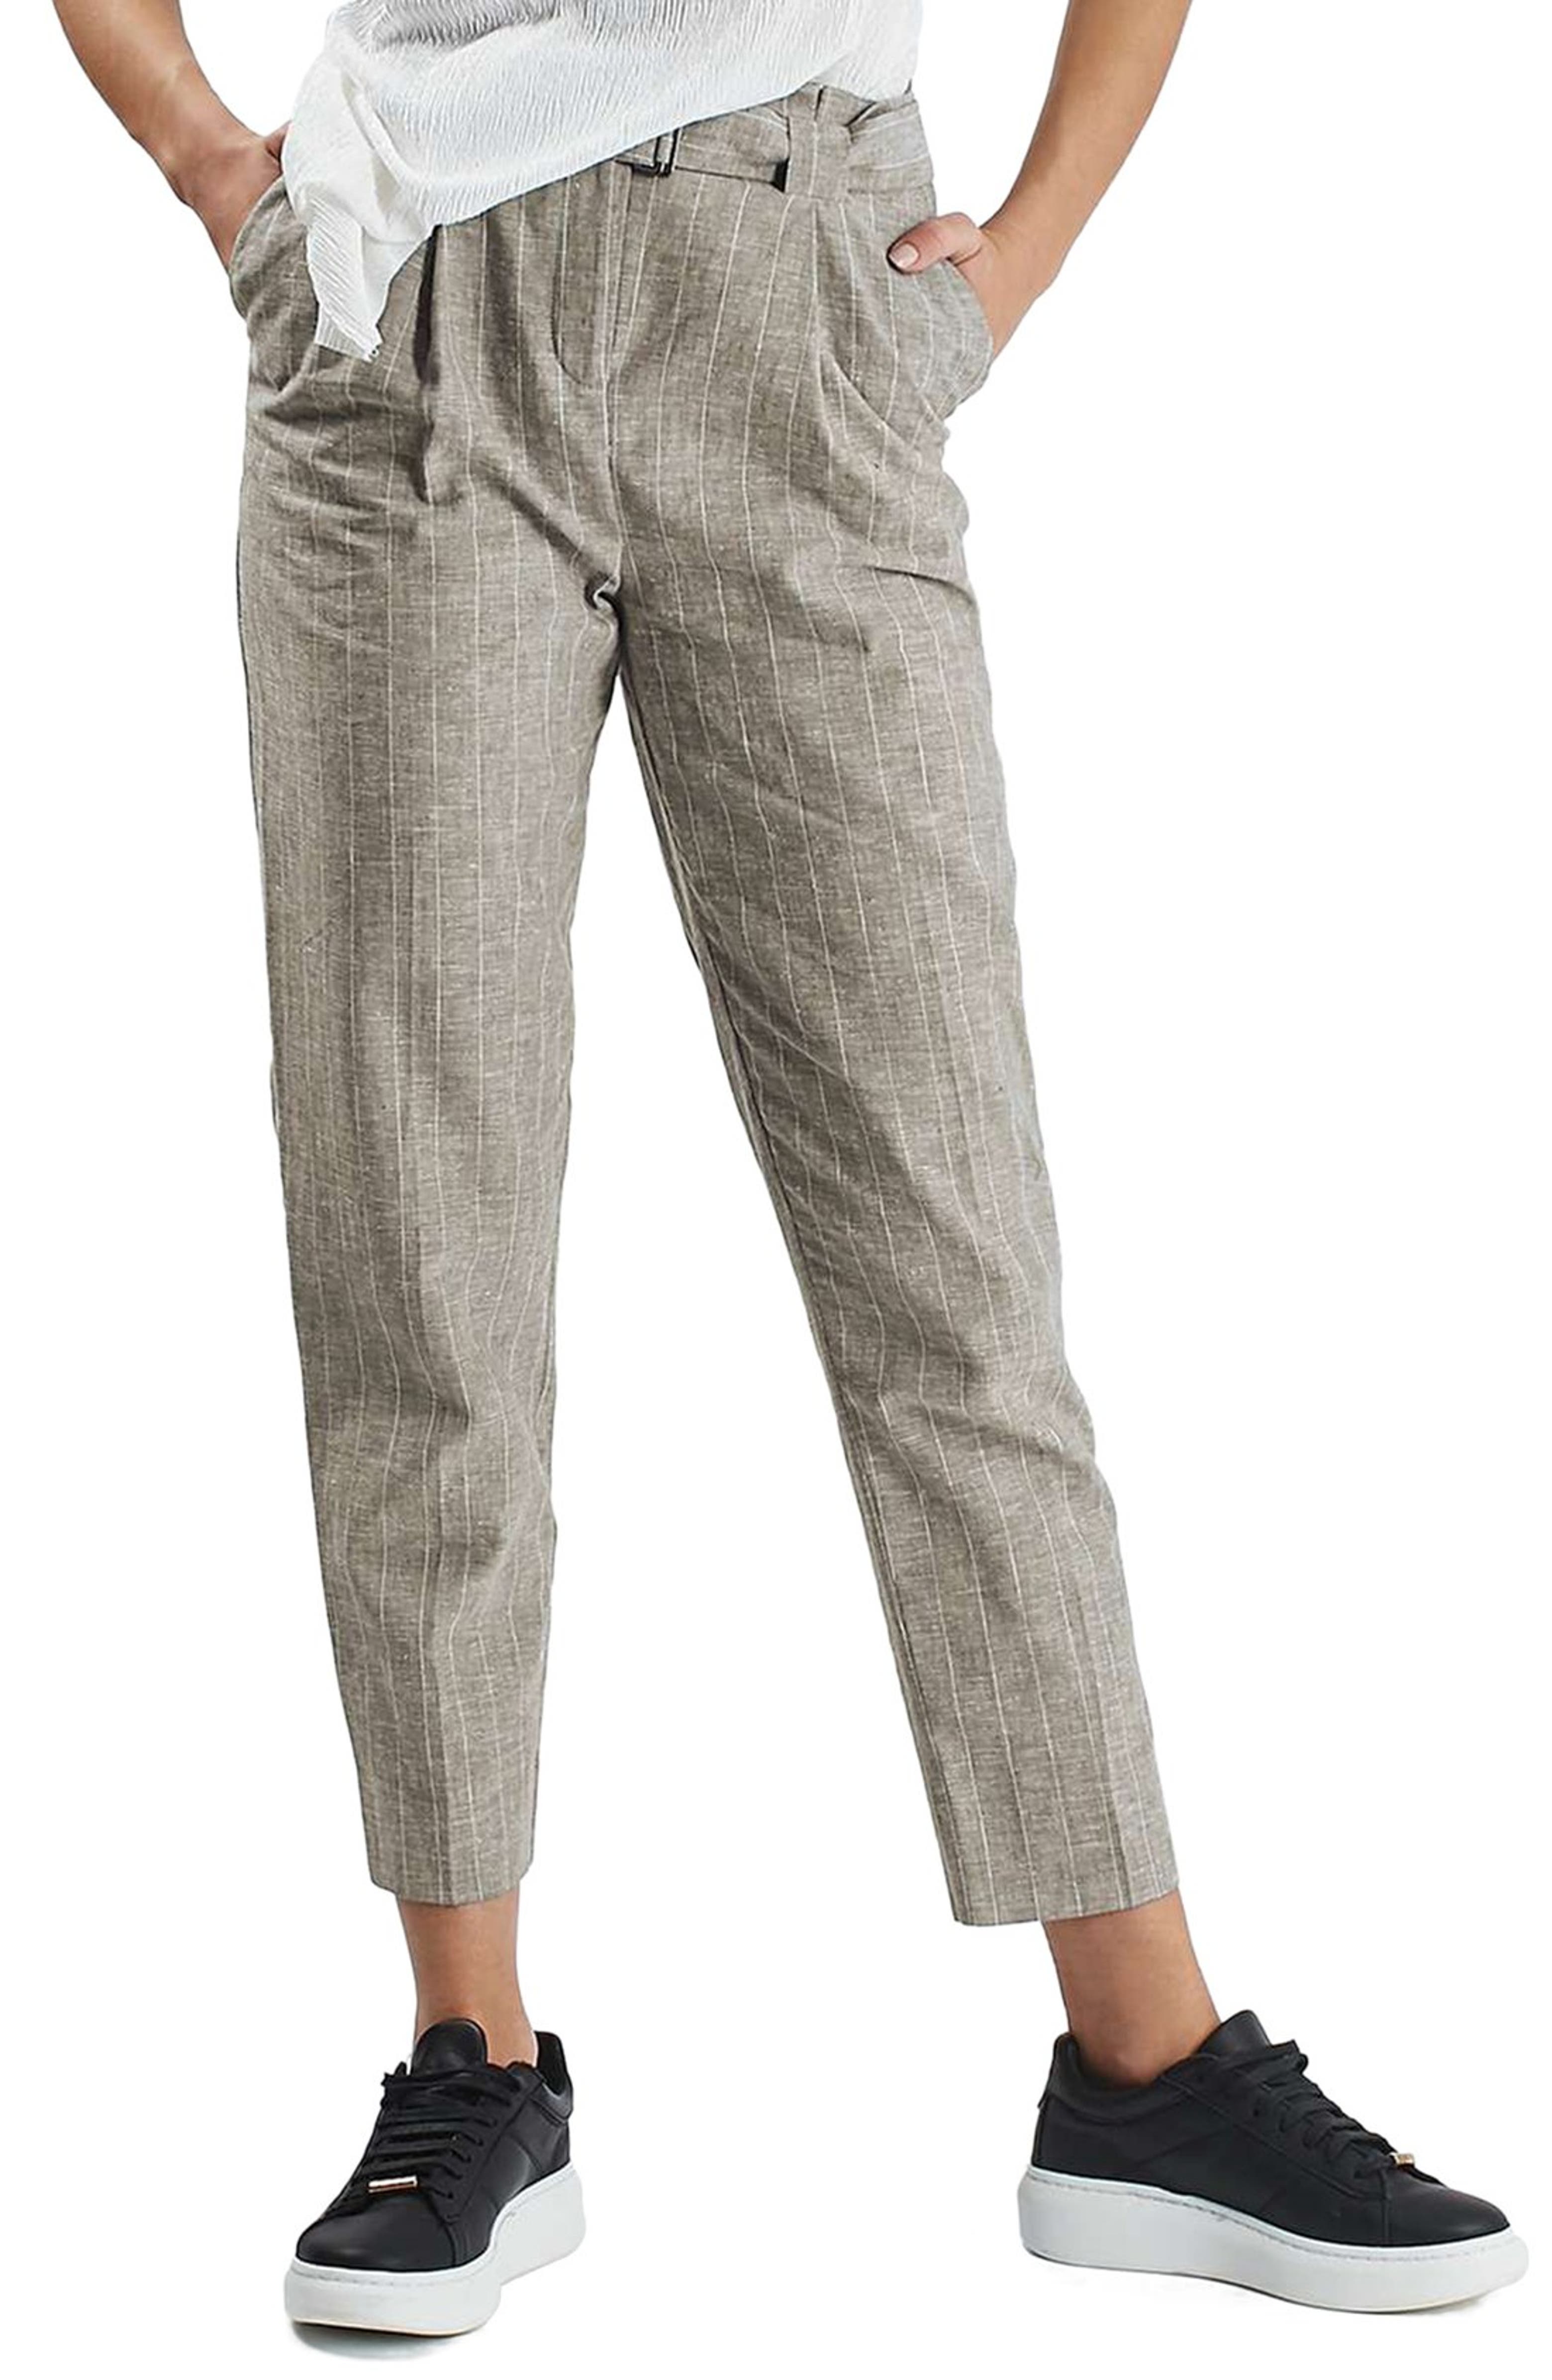 Topshop Belted Pinstripe Linen & Cotton Peg Trousers | Nordstrom